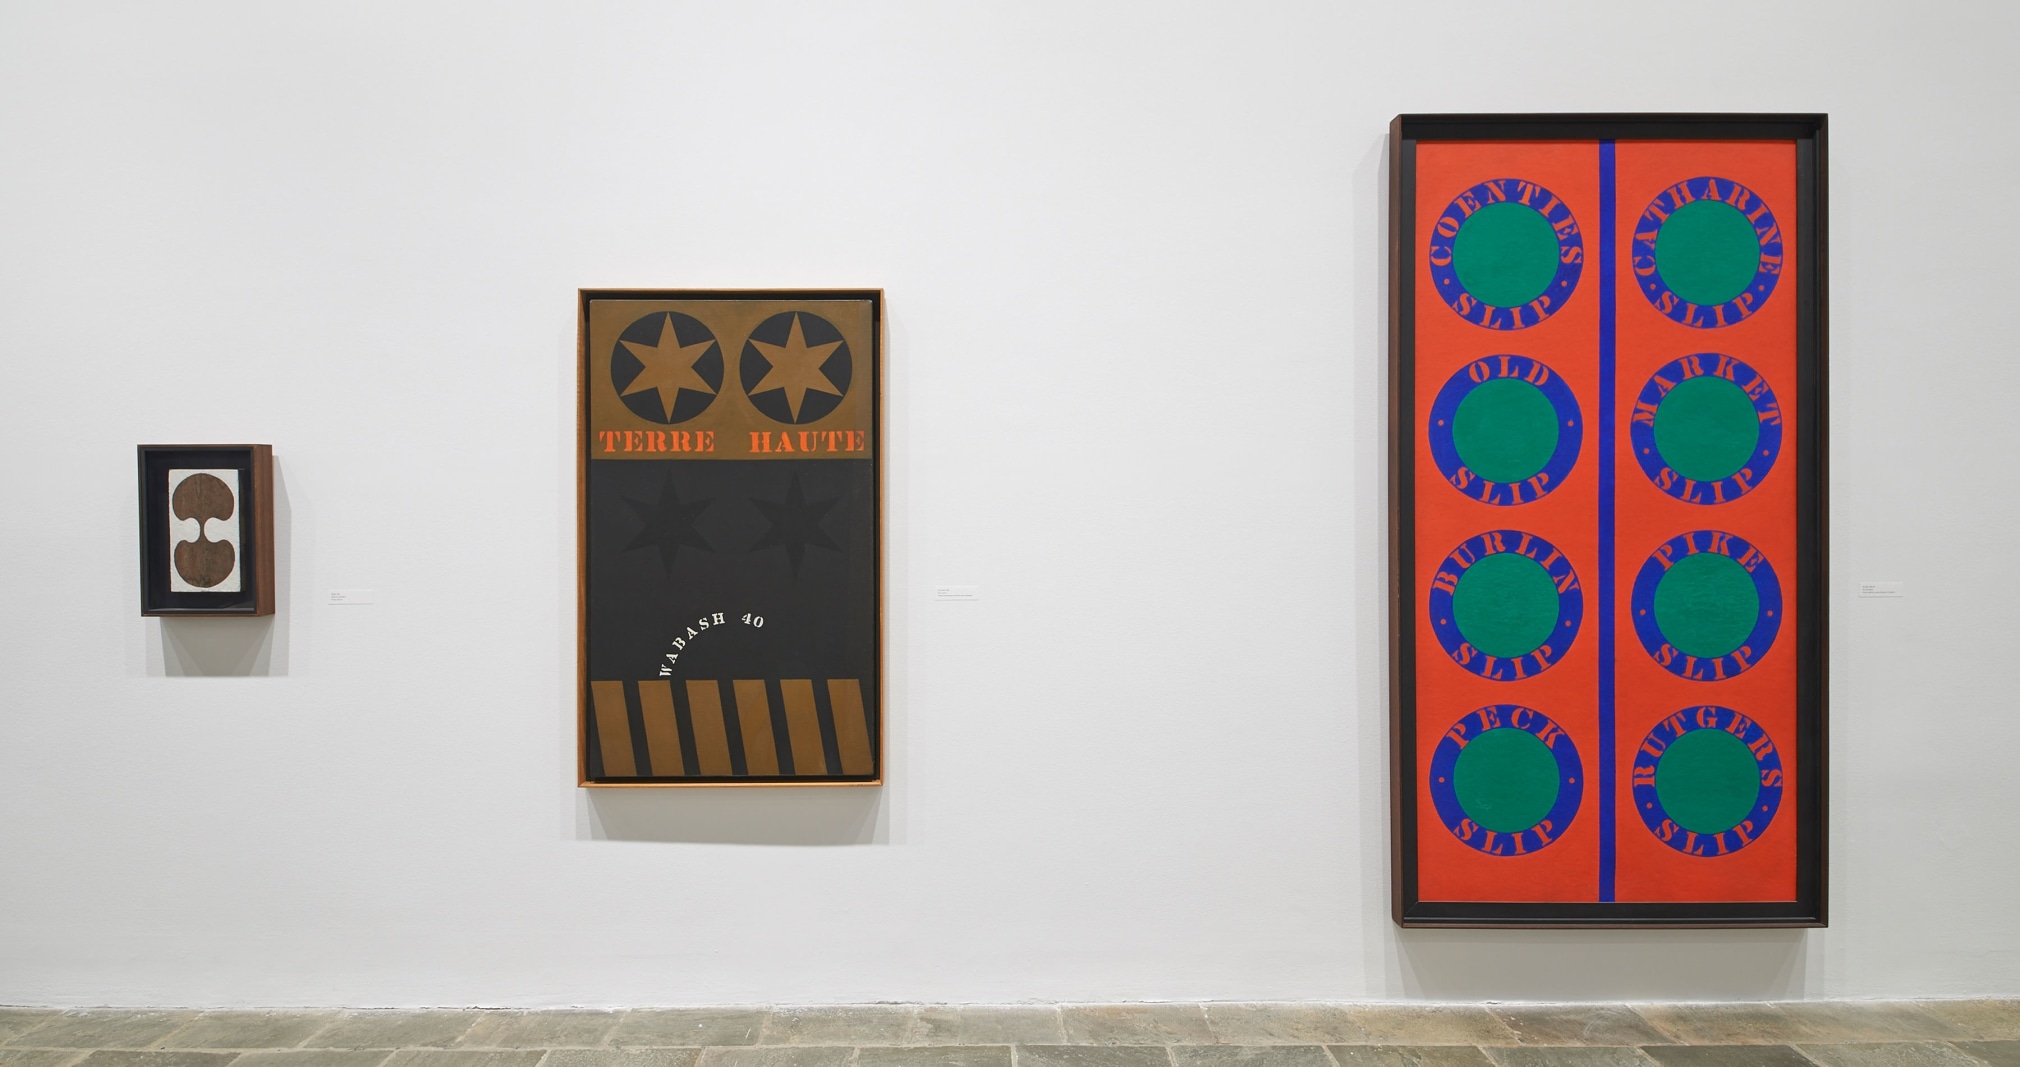 Installation view of Robert Indiana: Beyond LOVE, Whitney Museum of American Art, New York, September 26, 2013&ndash;January 5, 2014. Left to right, Ginkgo (1960), Terre Haute (1960), and The Slips (1959&ndash;60). Photo: Tom Powel Imaging; Artwork: &copy; Morgan Art Foundation Ltd./Artists Rights Society (ARS), NY